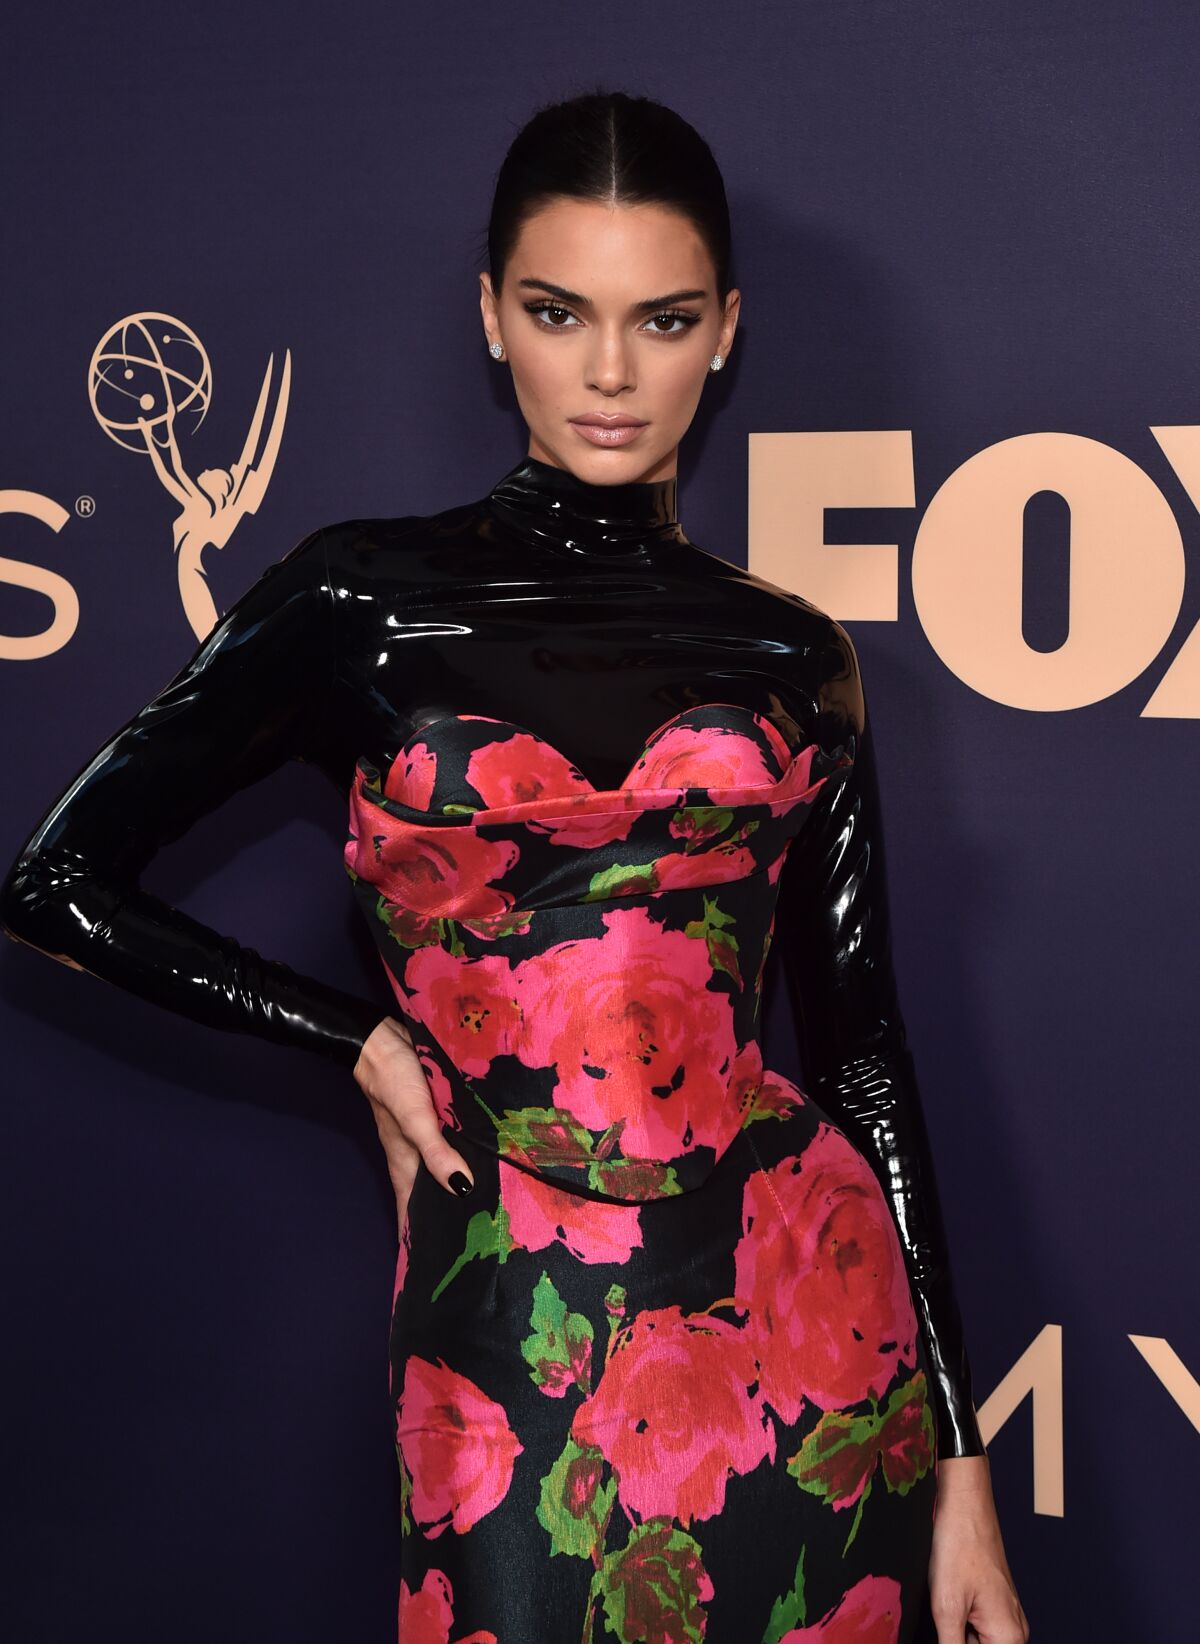 Kendall Jenner poses with her hand on her hip, wearing a latex and floral gown